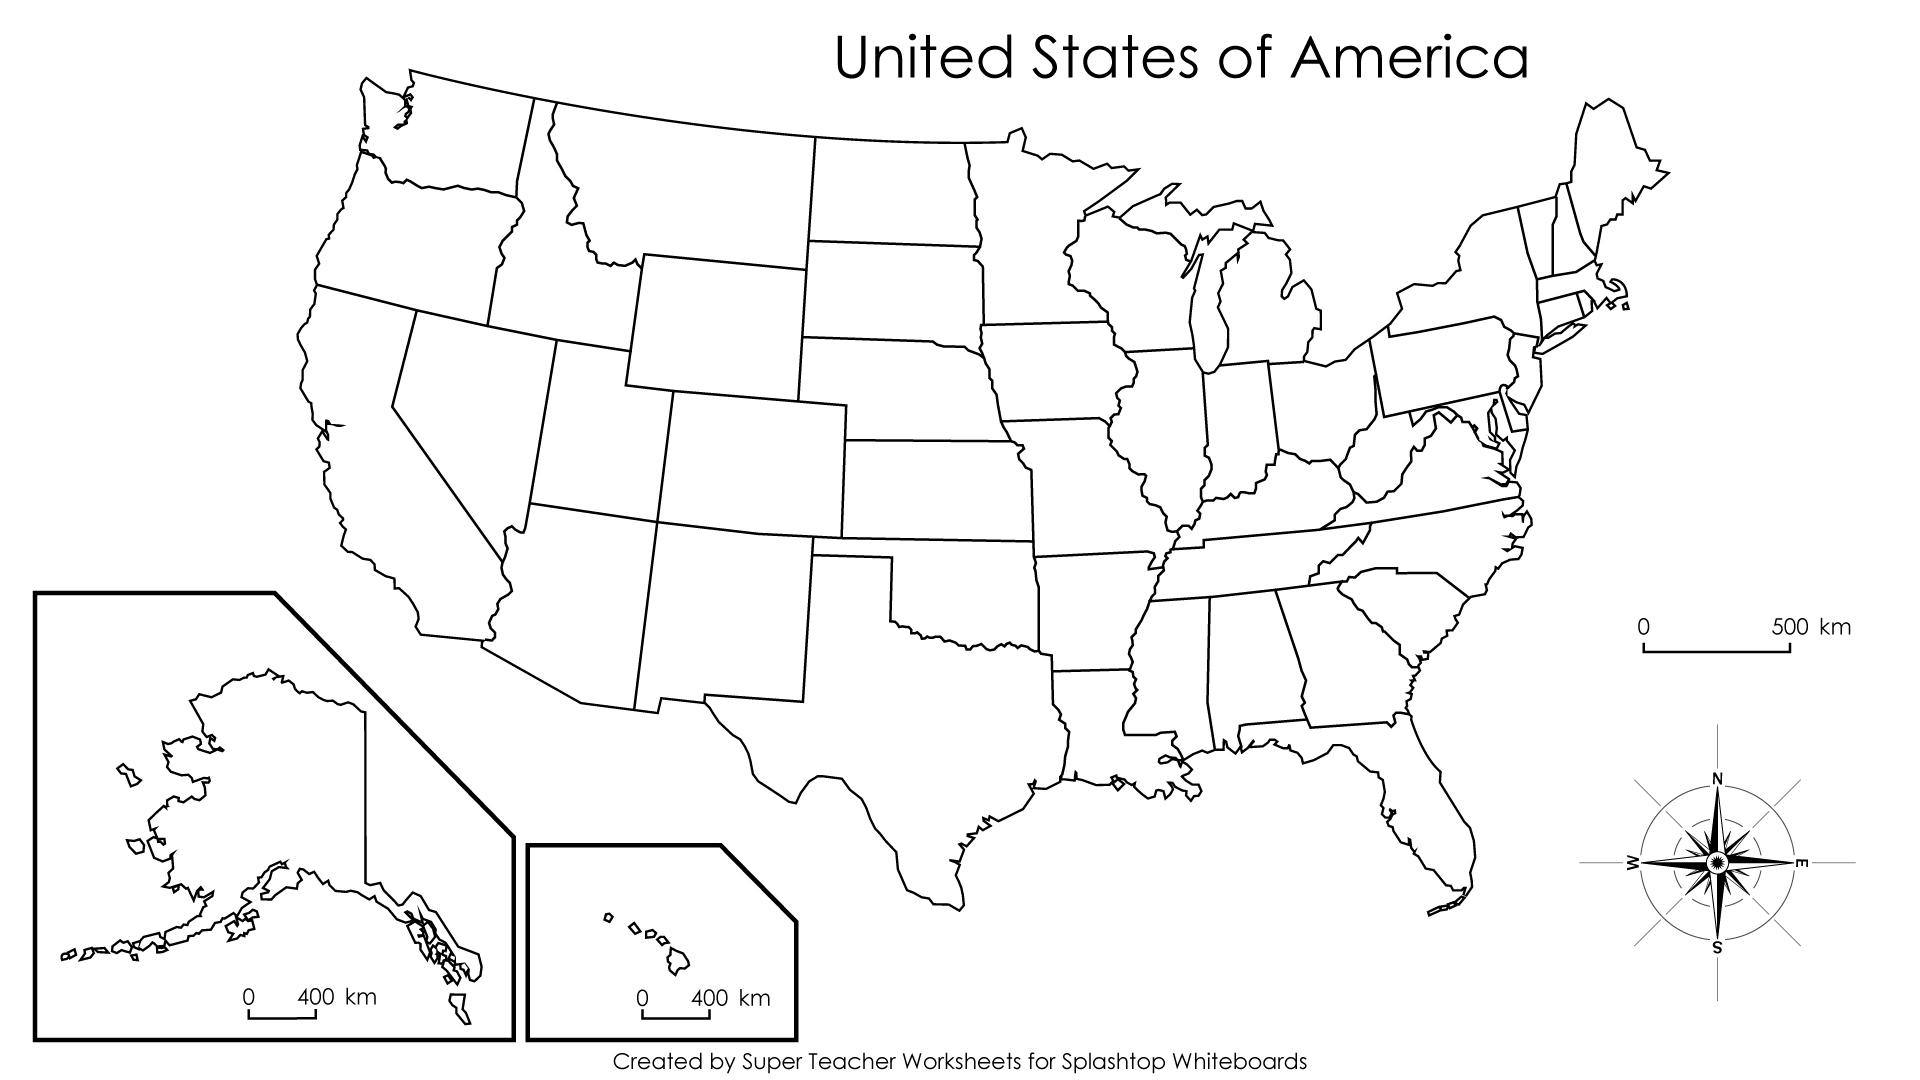 This USA map shows an outline of the 50 states without labels.